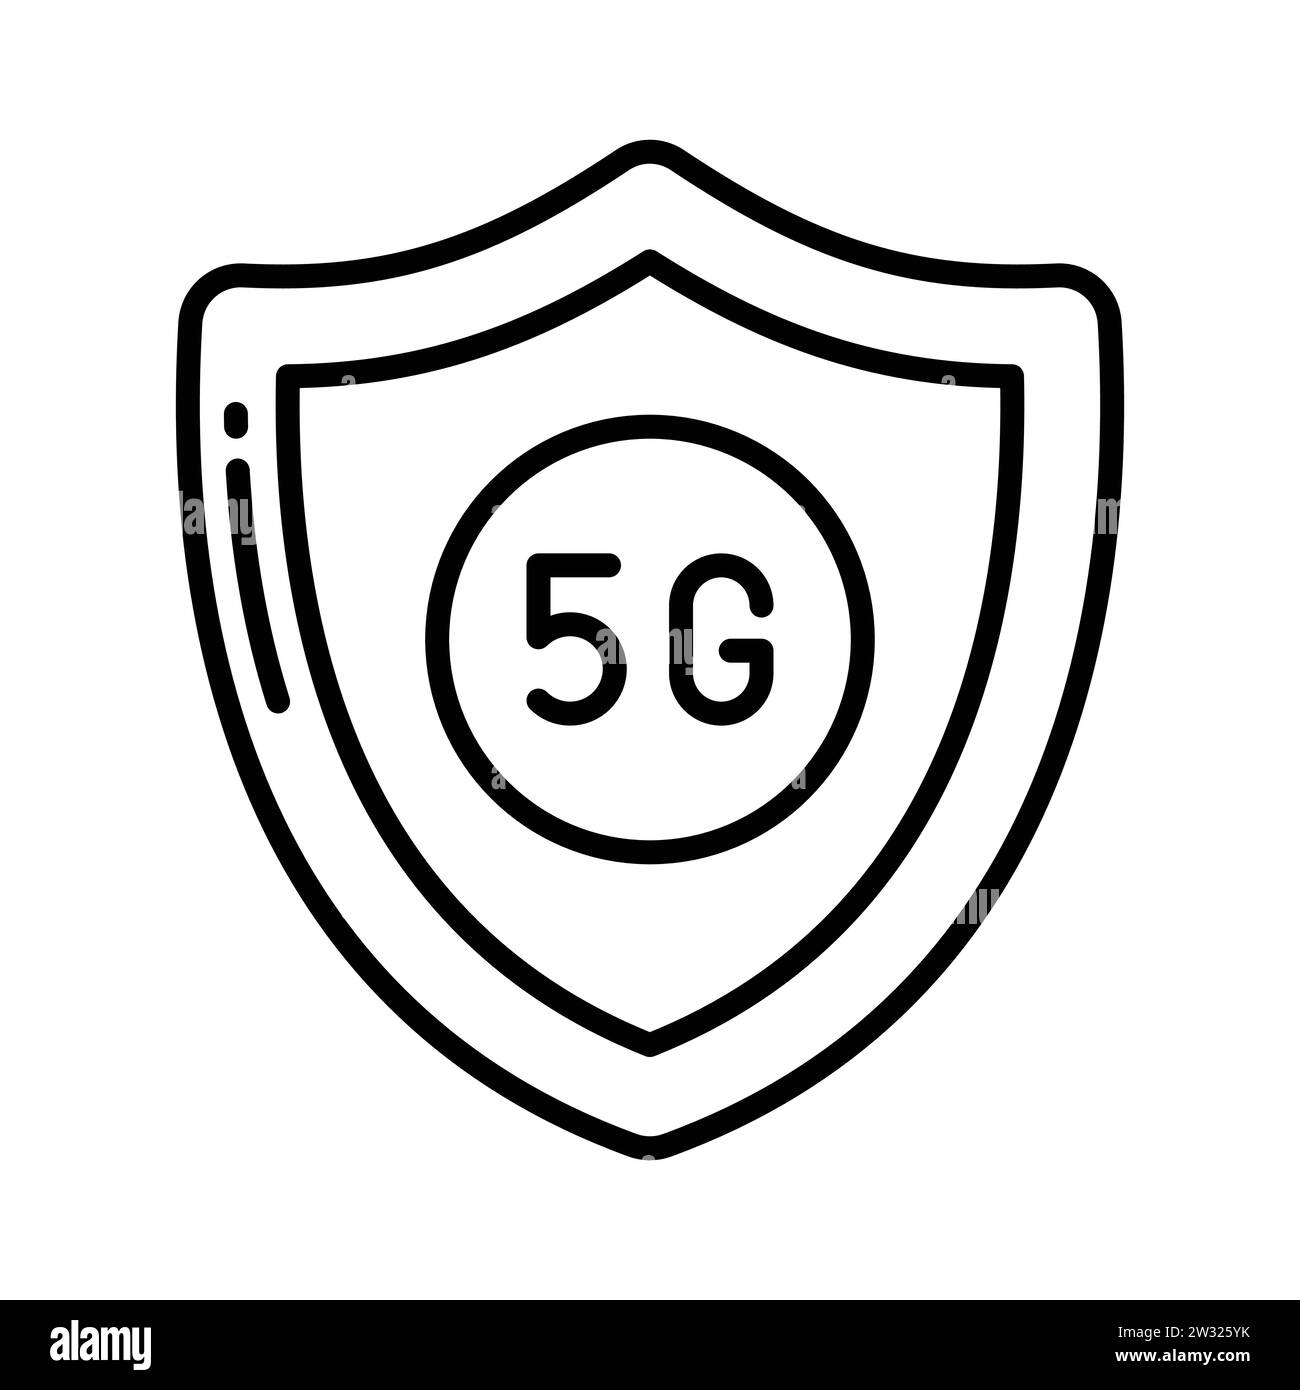 Carefully designed 5G network icon in trendy style, 5G technology vector Stock Vector